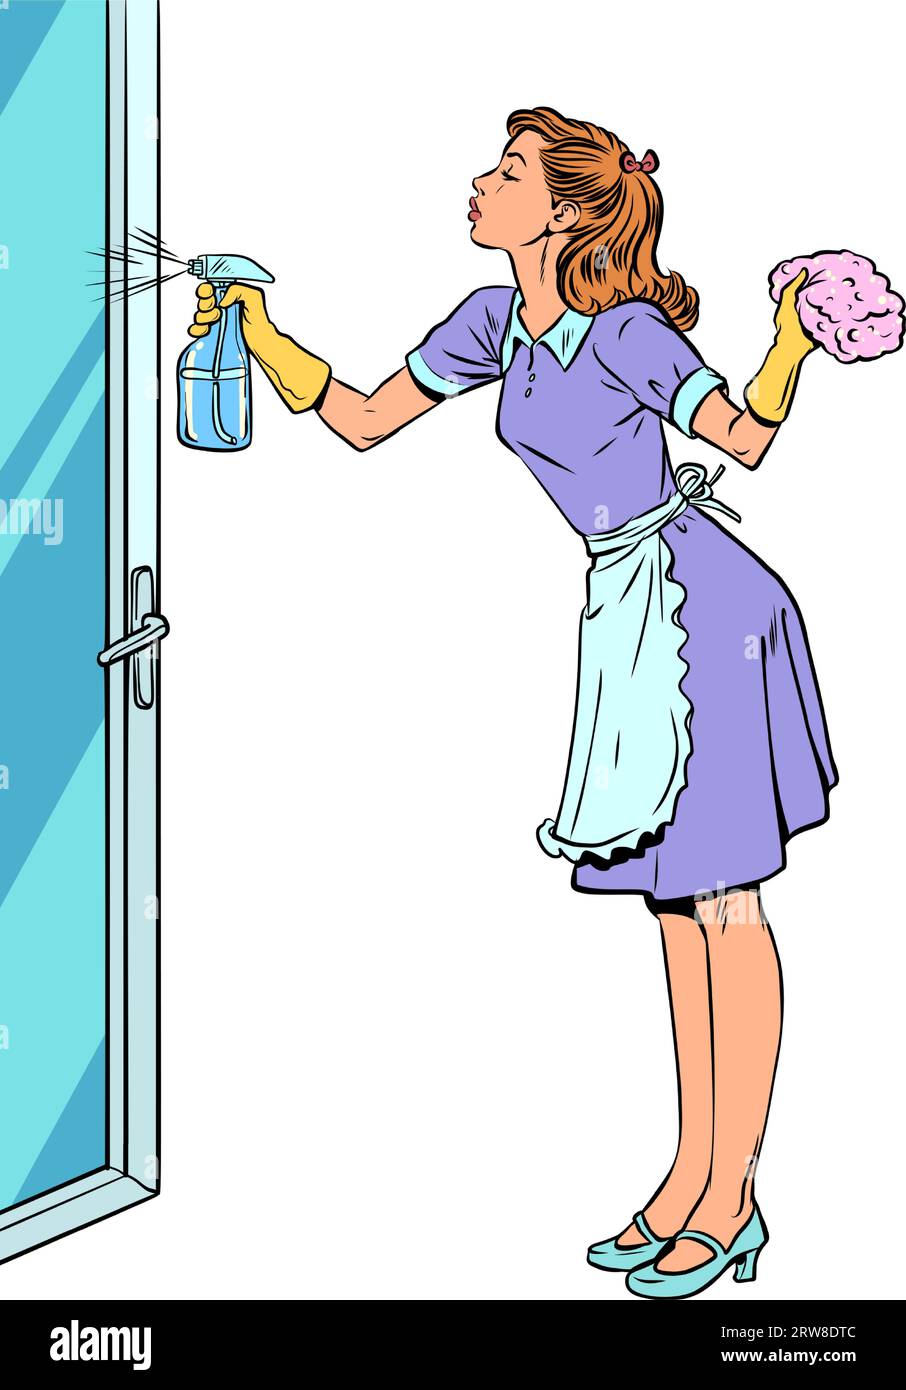 Cleaning service for cleaning your home. Responsible housewife is cleaning the house. A girl in uniform washes a glass door. Stock Vector